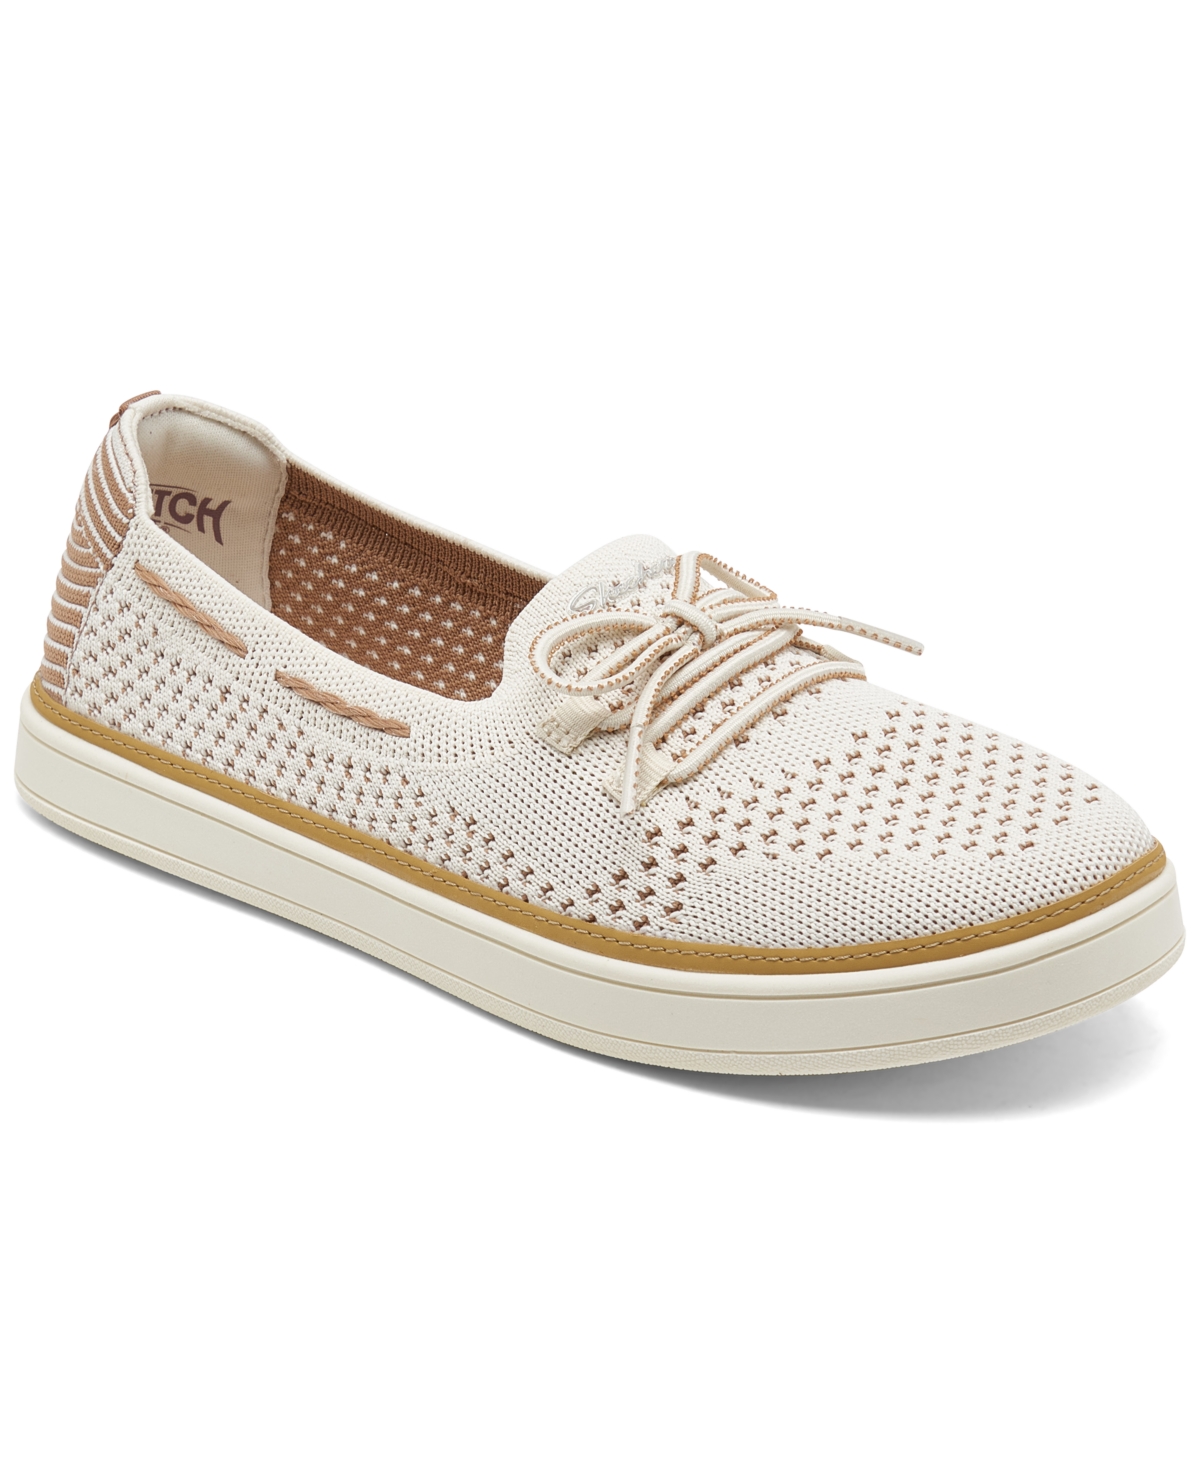 Women's Coastal Drive Casual Sneakers from Finish Line - Off White